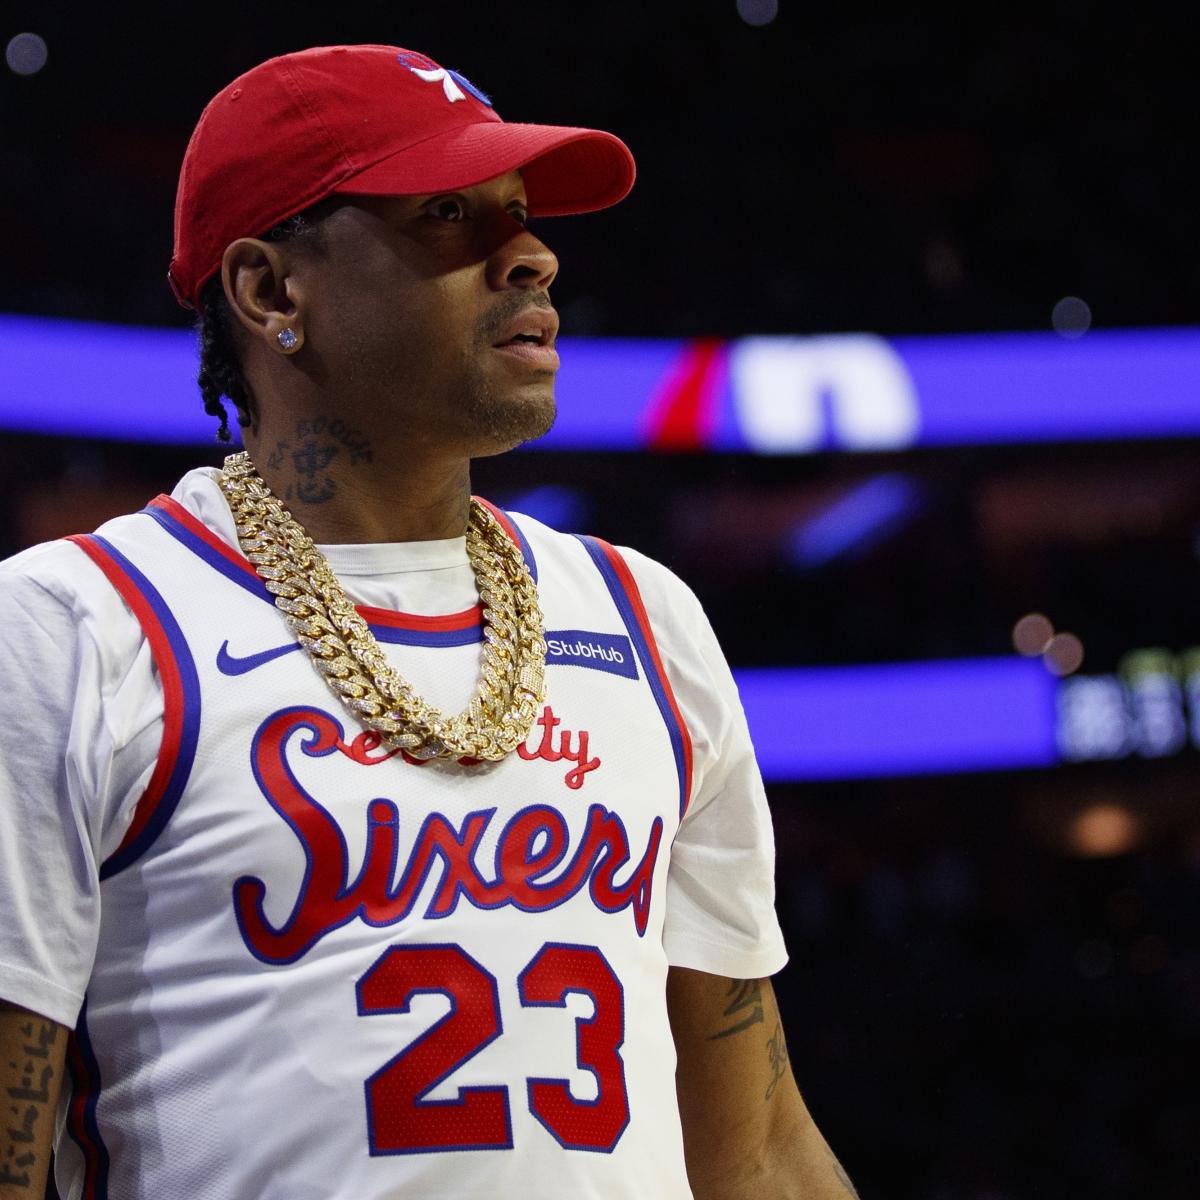 Being 7 years away from a $32 million payday, Allen Iverson stars in  hilarious NFL ad